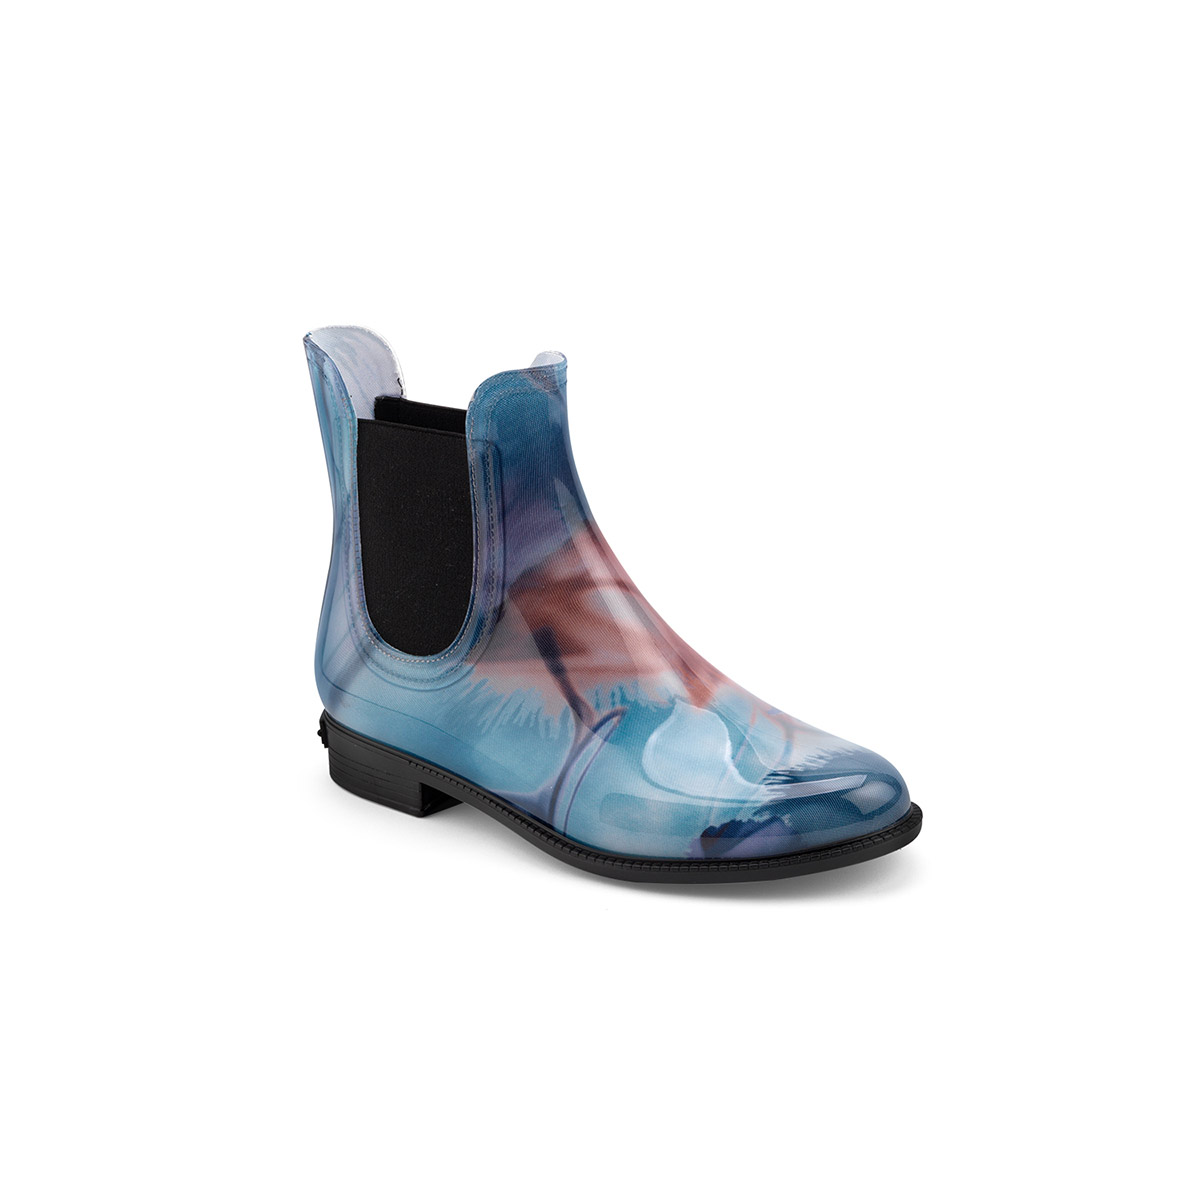 chelsea rain boot in pvc with pattern print